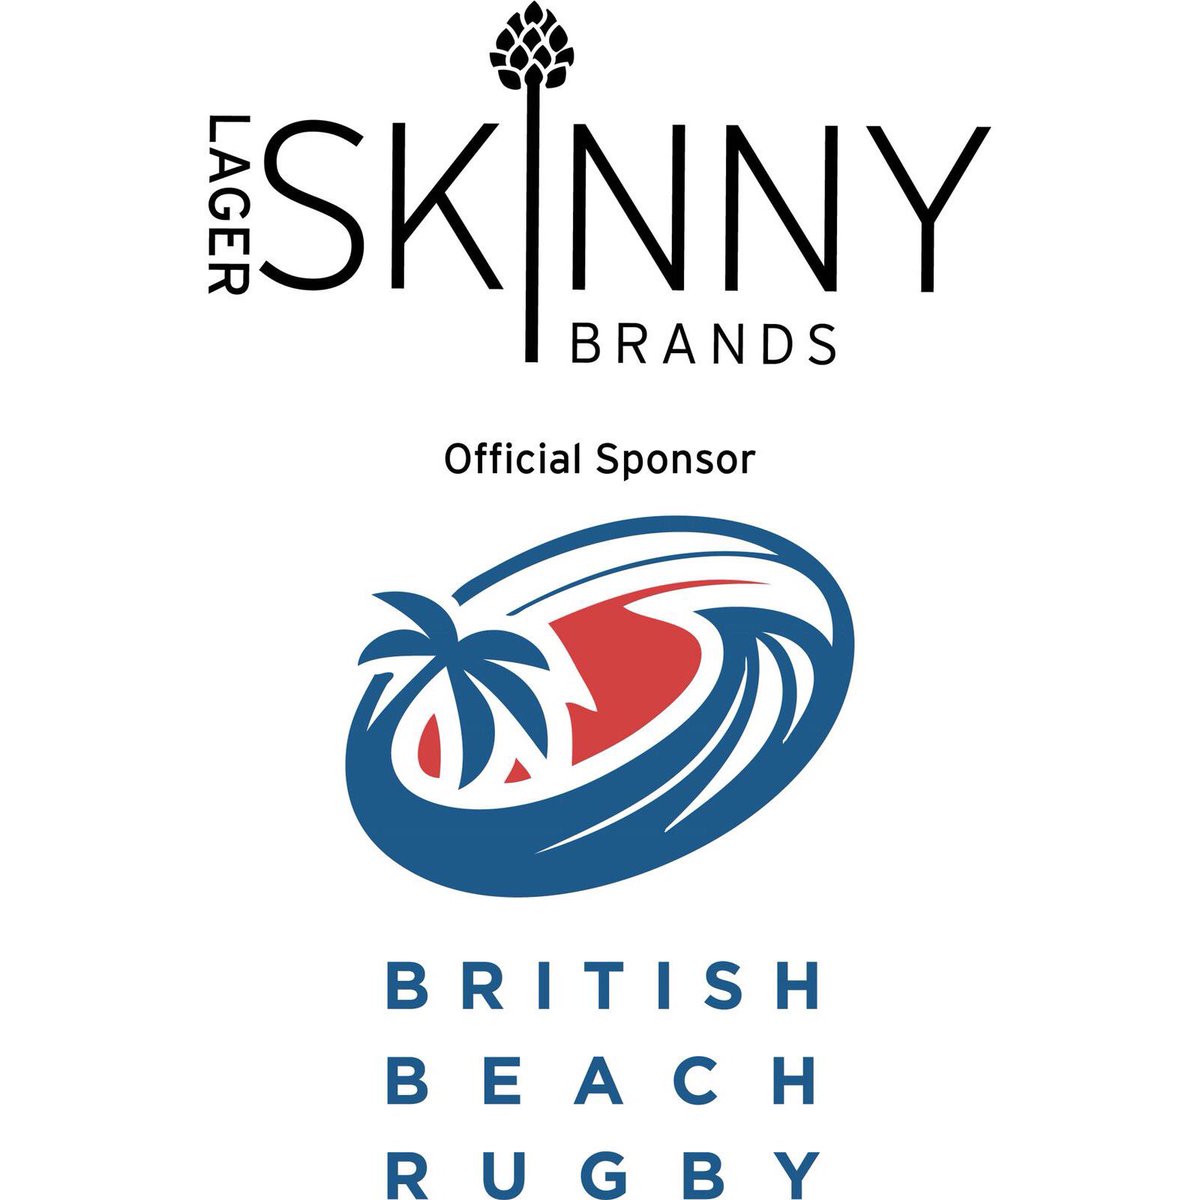 *Drumroll Please* We are BEYOND thrilled to announce the sponsor for #BBR2018 @SkinnyLager cannot wait for you guys to meet the Skinny team on the beach! 🇬🇧🏖🏉🍻